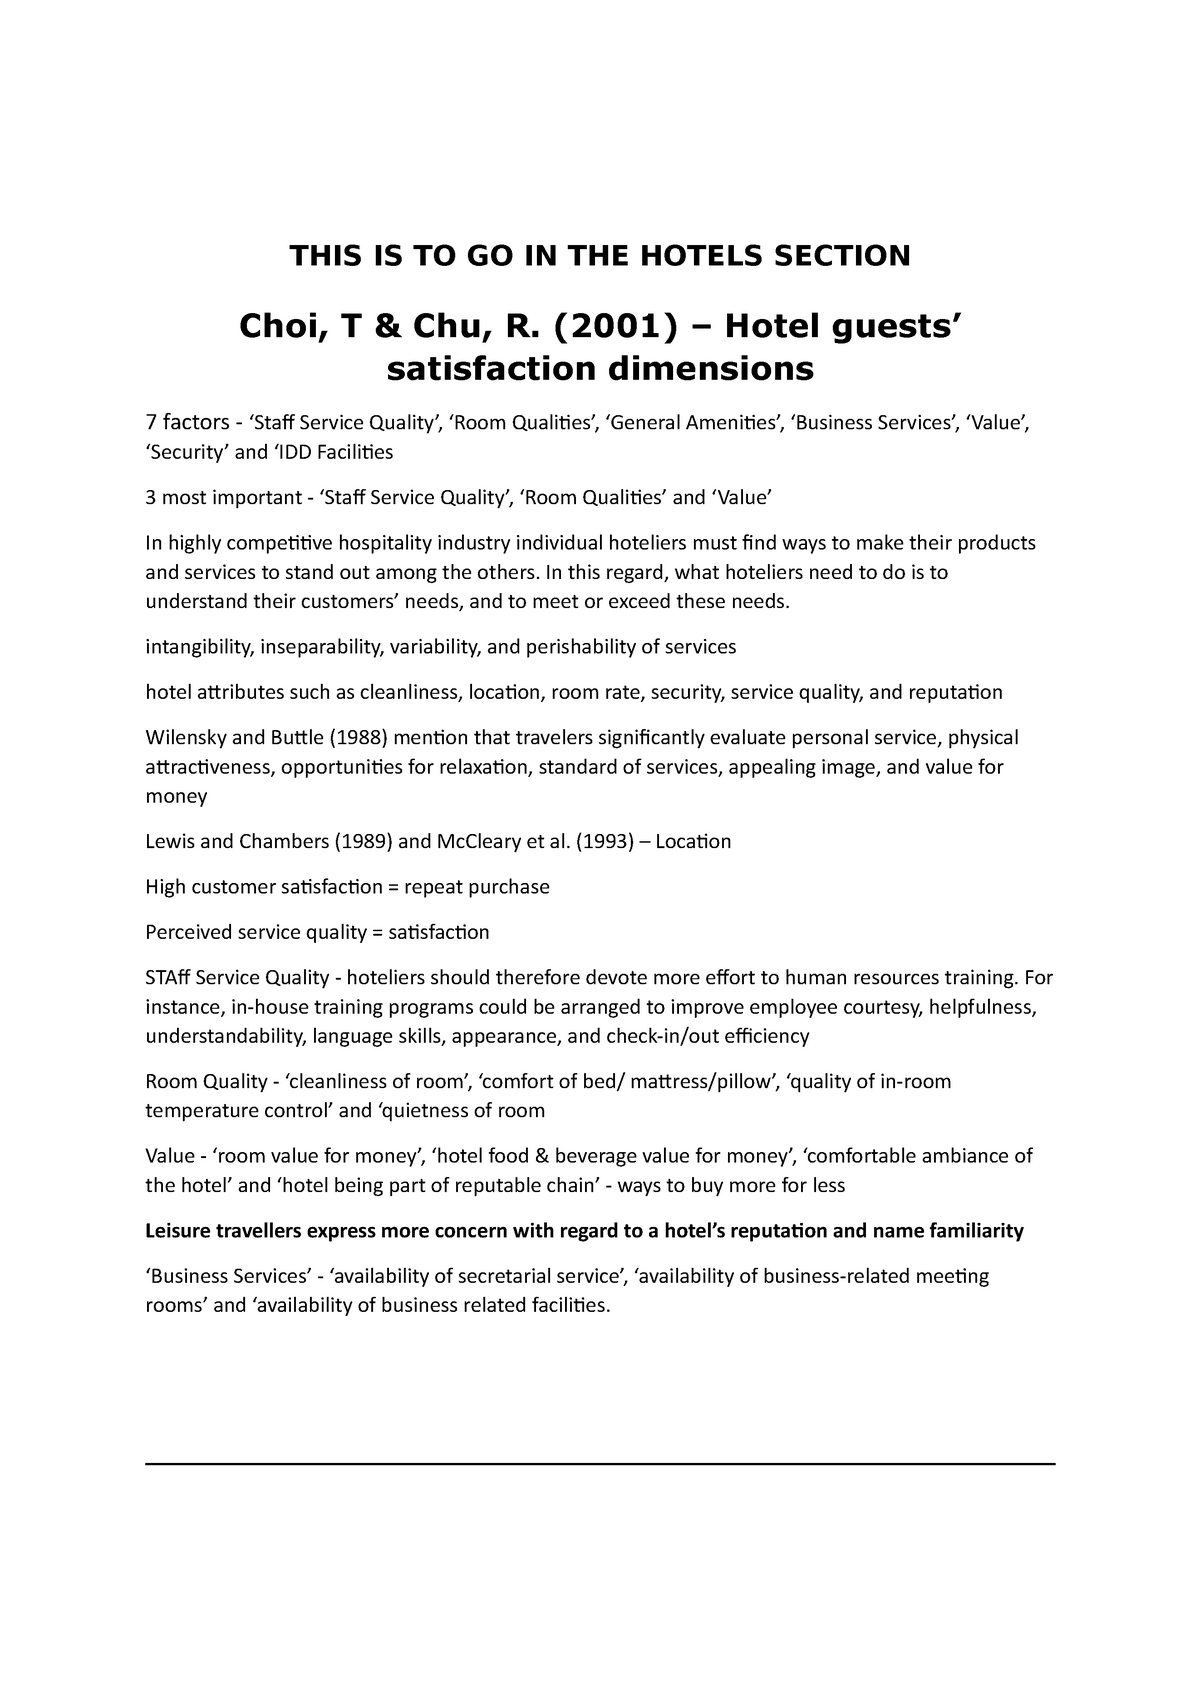 literature review on service quality in hotel industry